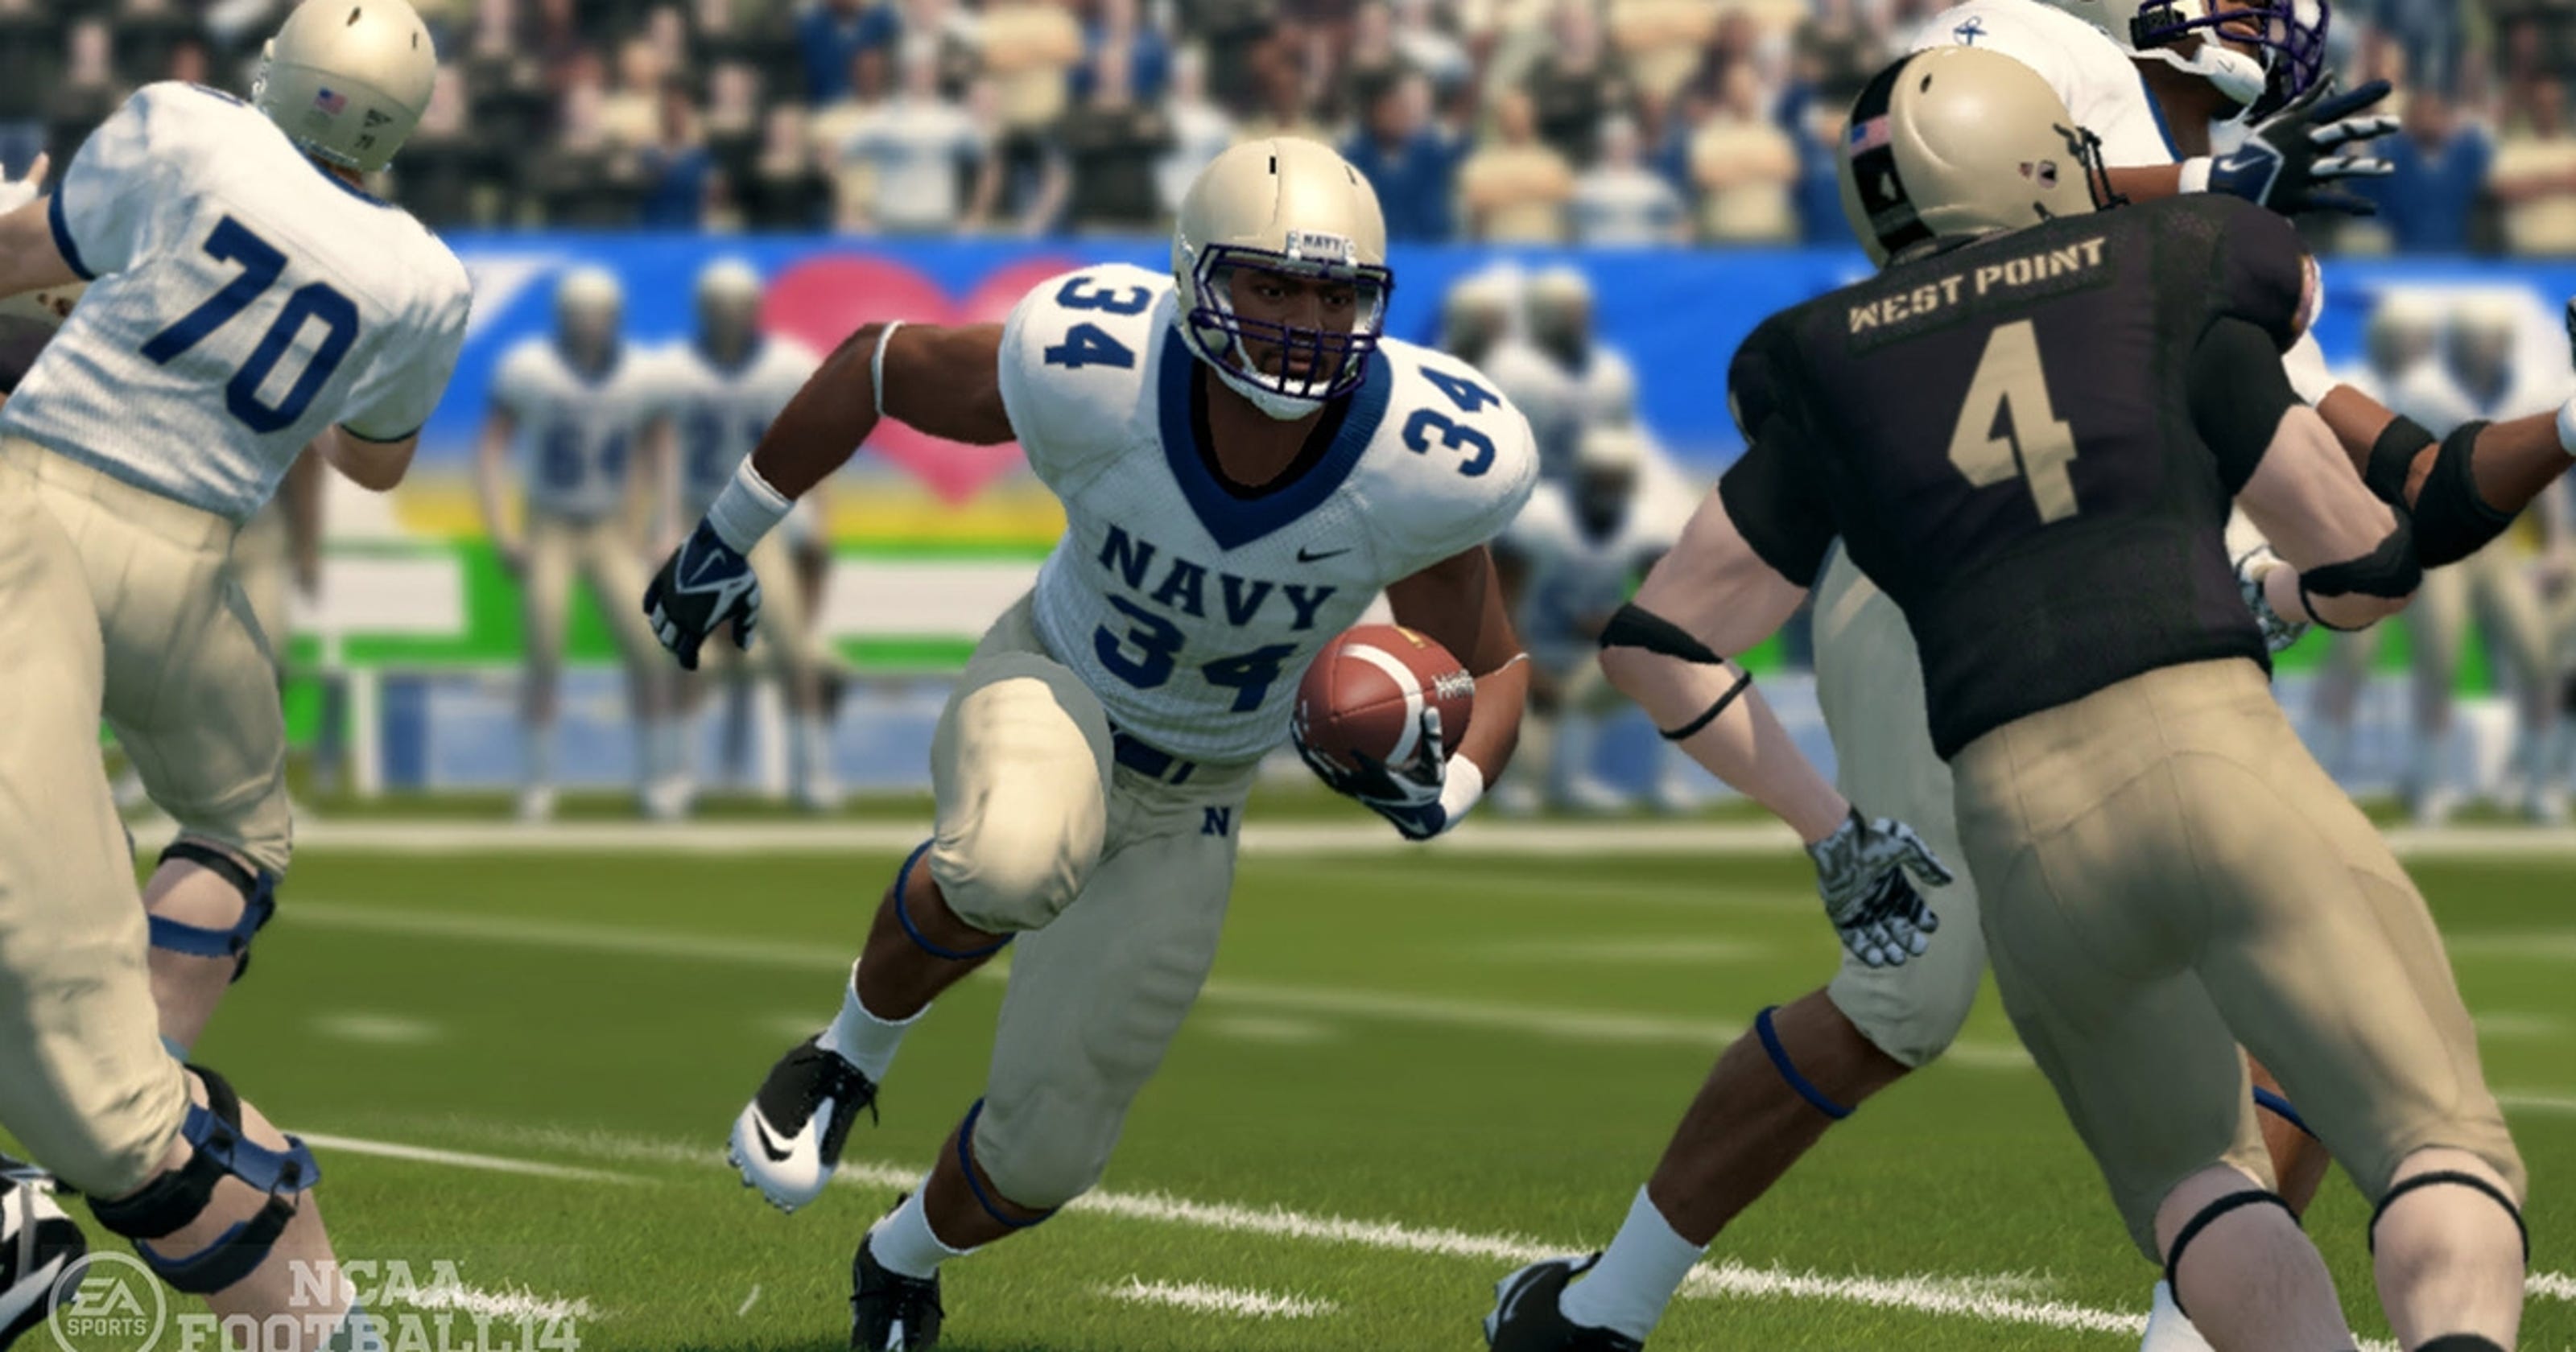 Review: &#039;NCAA Football 14&#039; steps up its game